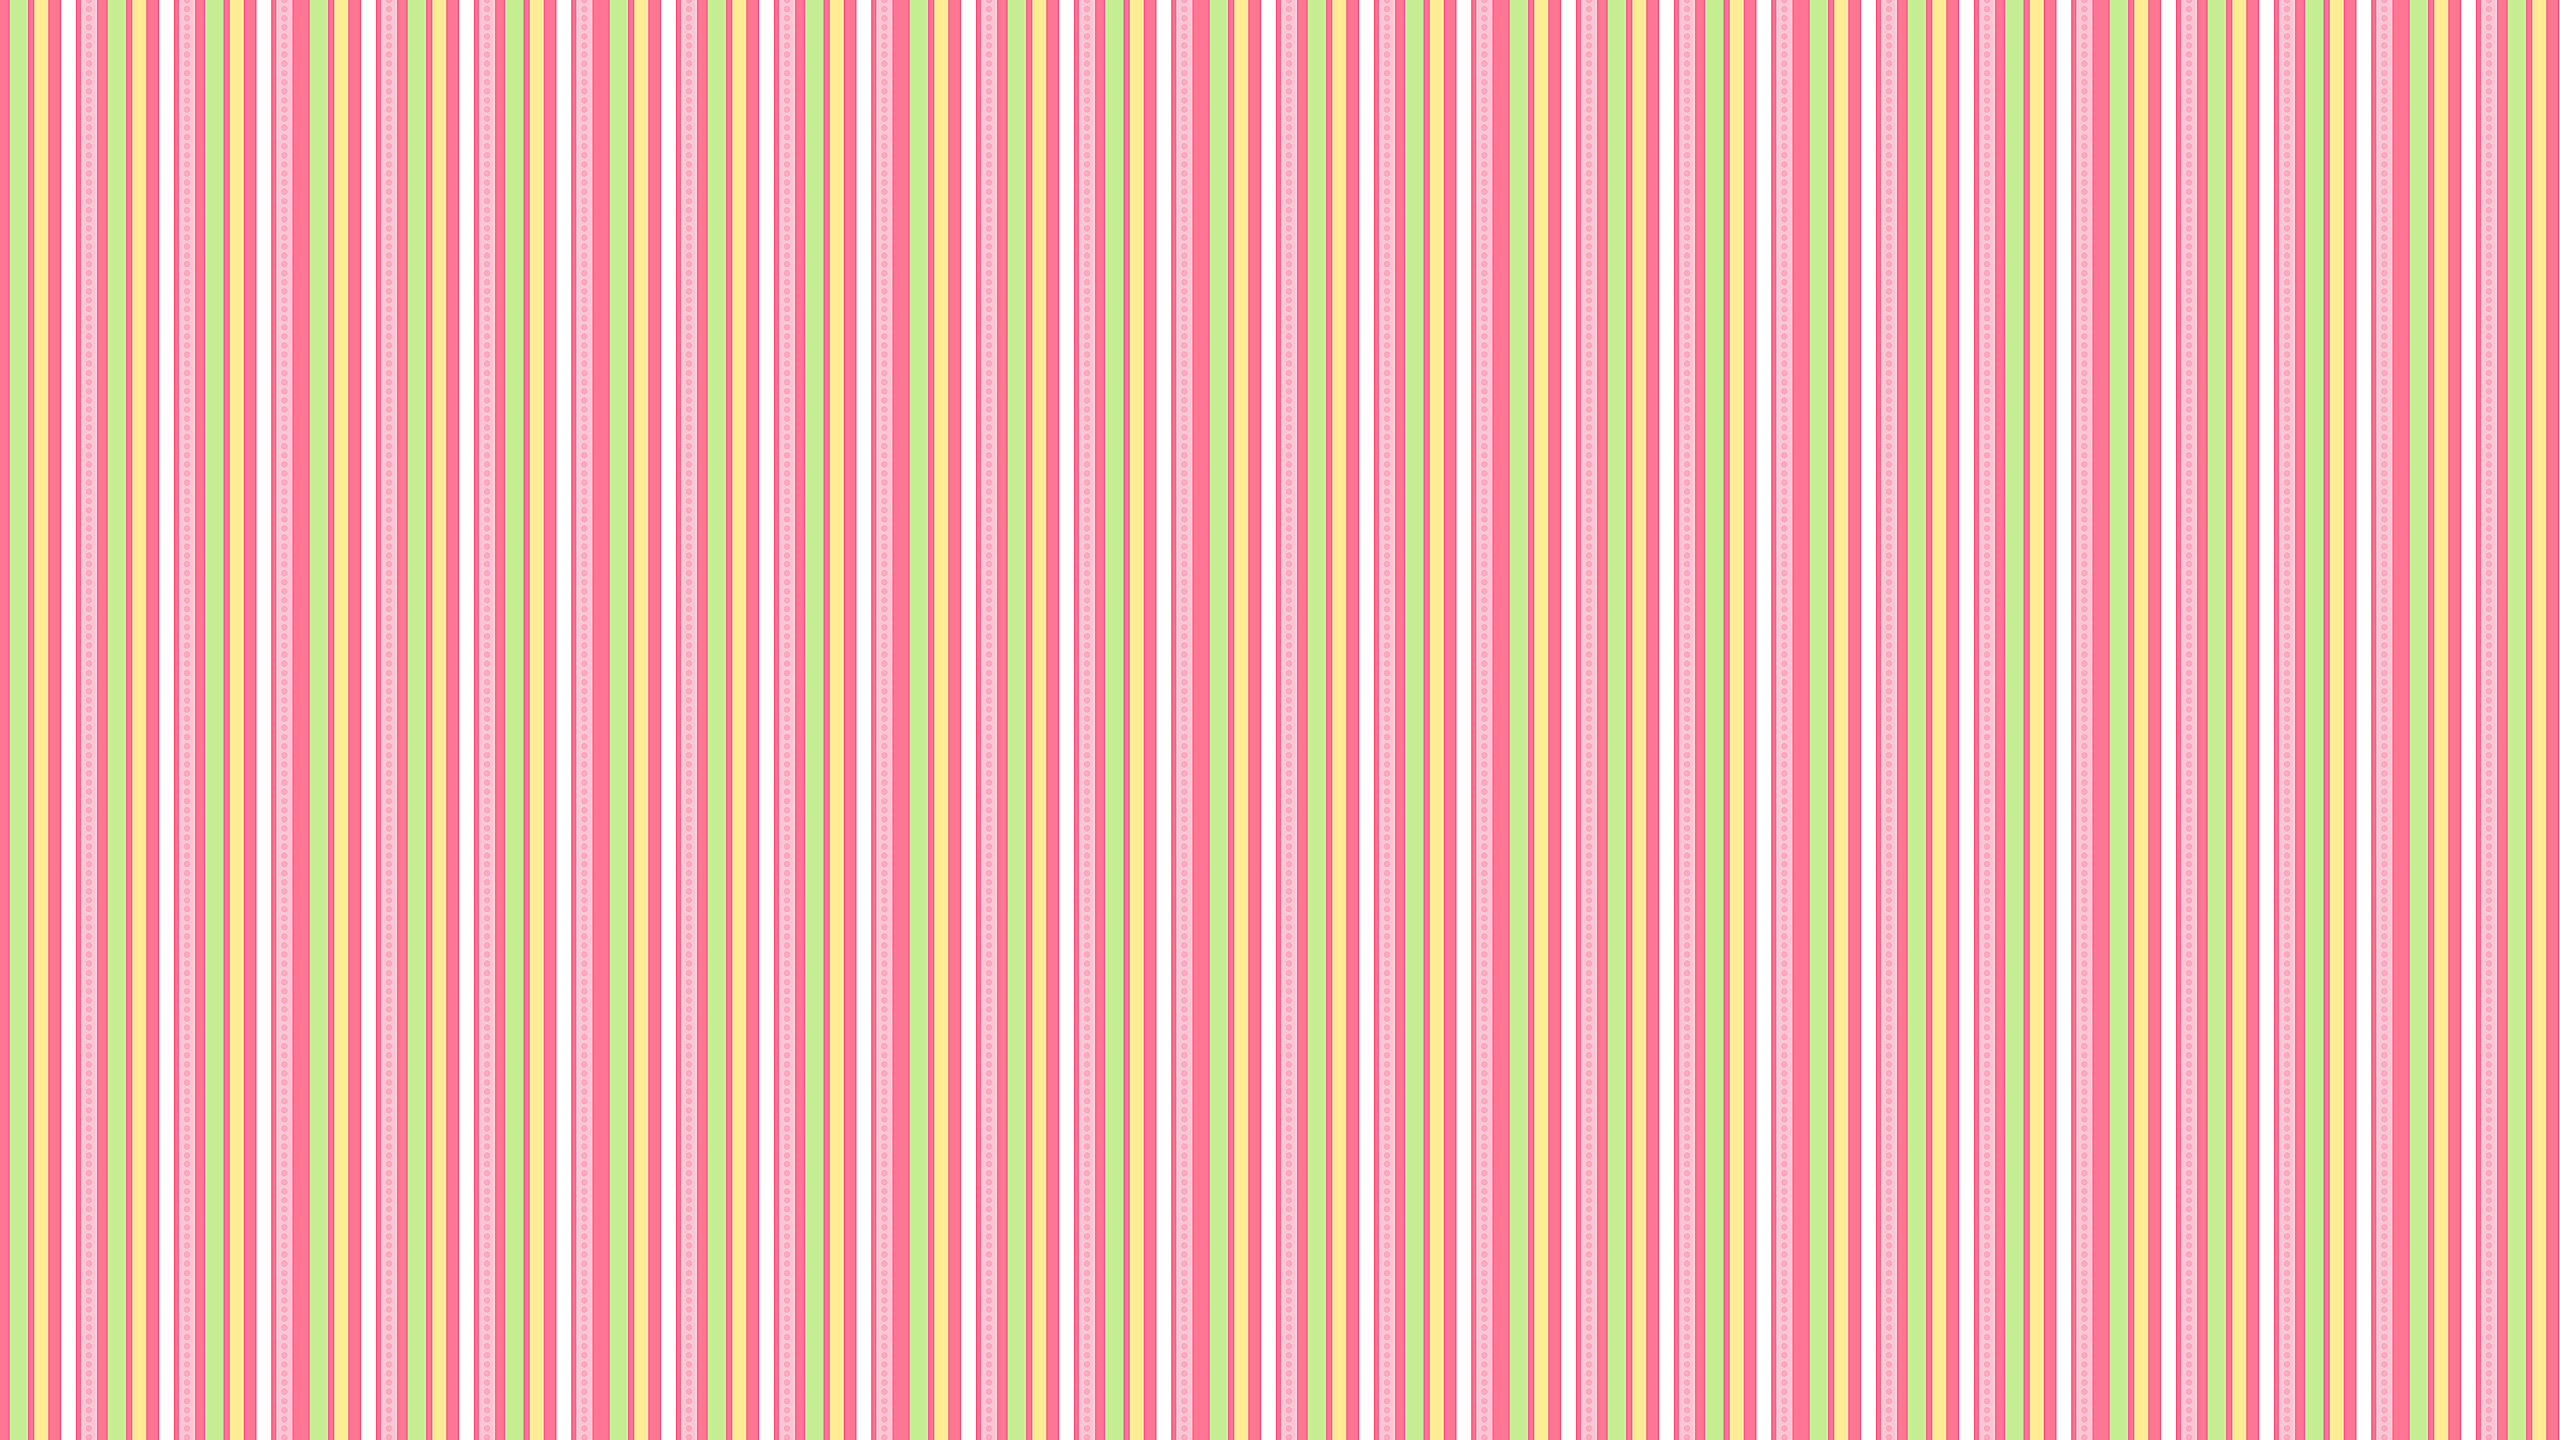 Free download this Coral Stripes Desktop Wallpaper is easy Just save the wallpaper [2560x1440] for your Desktop, Mobile & Tablet. Explore Striped Wallpaper Canada. Blue Striped Wallpaper, Horizontal Striped